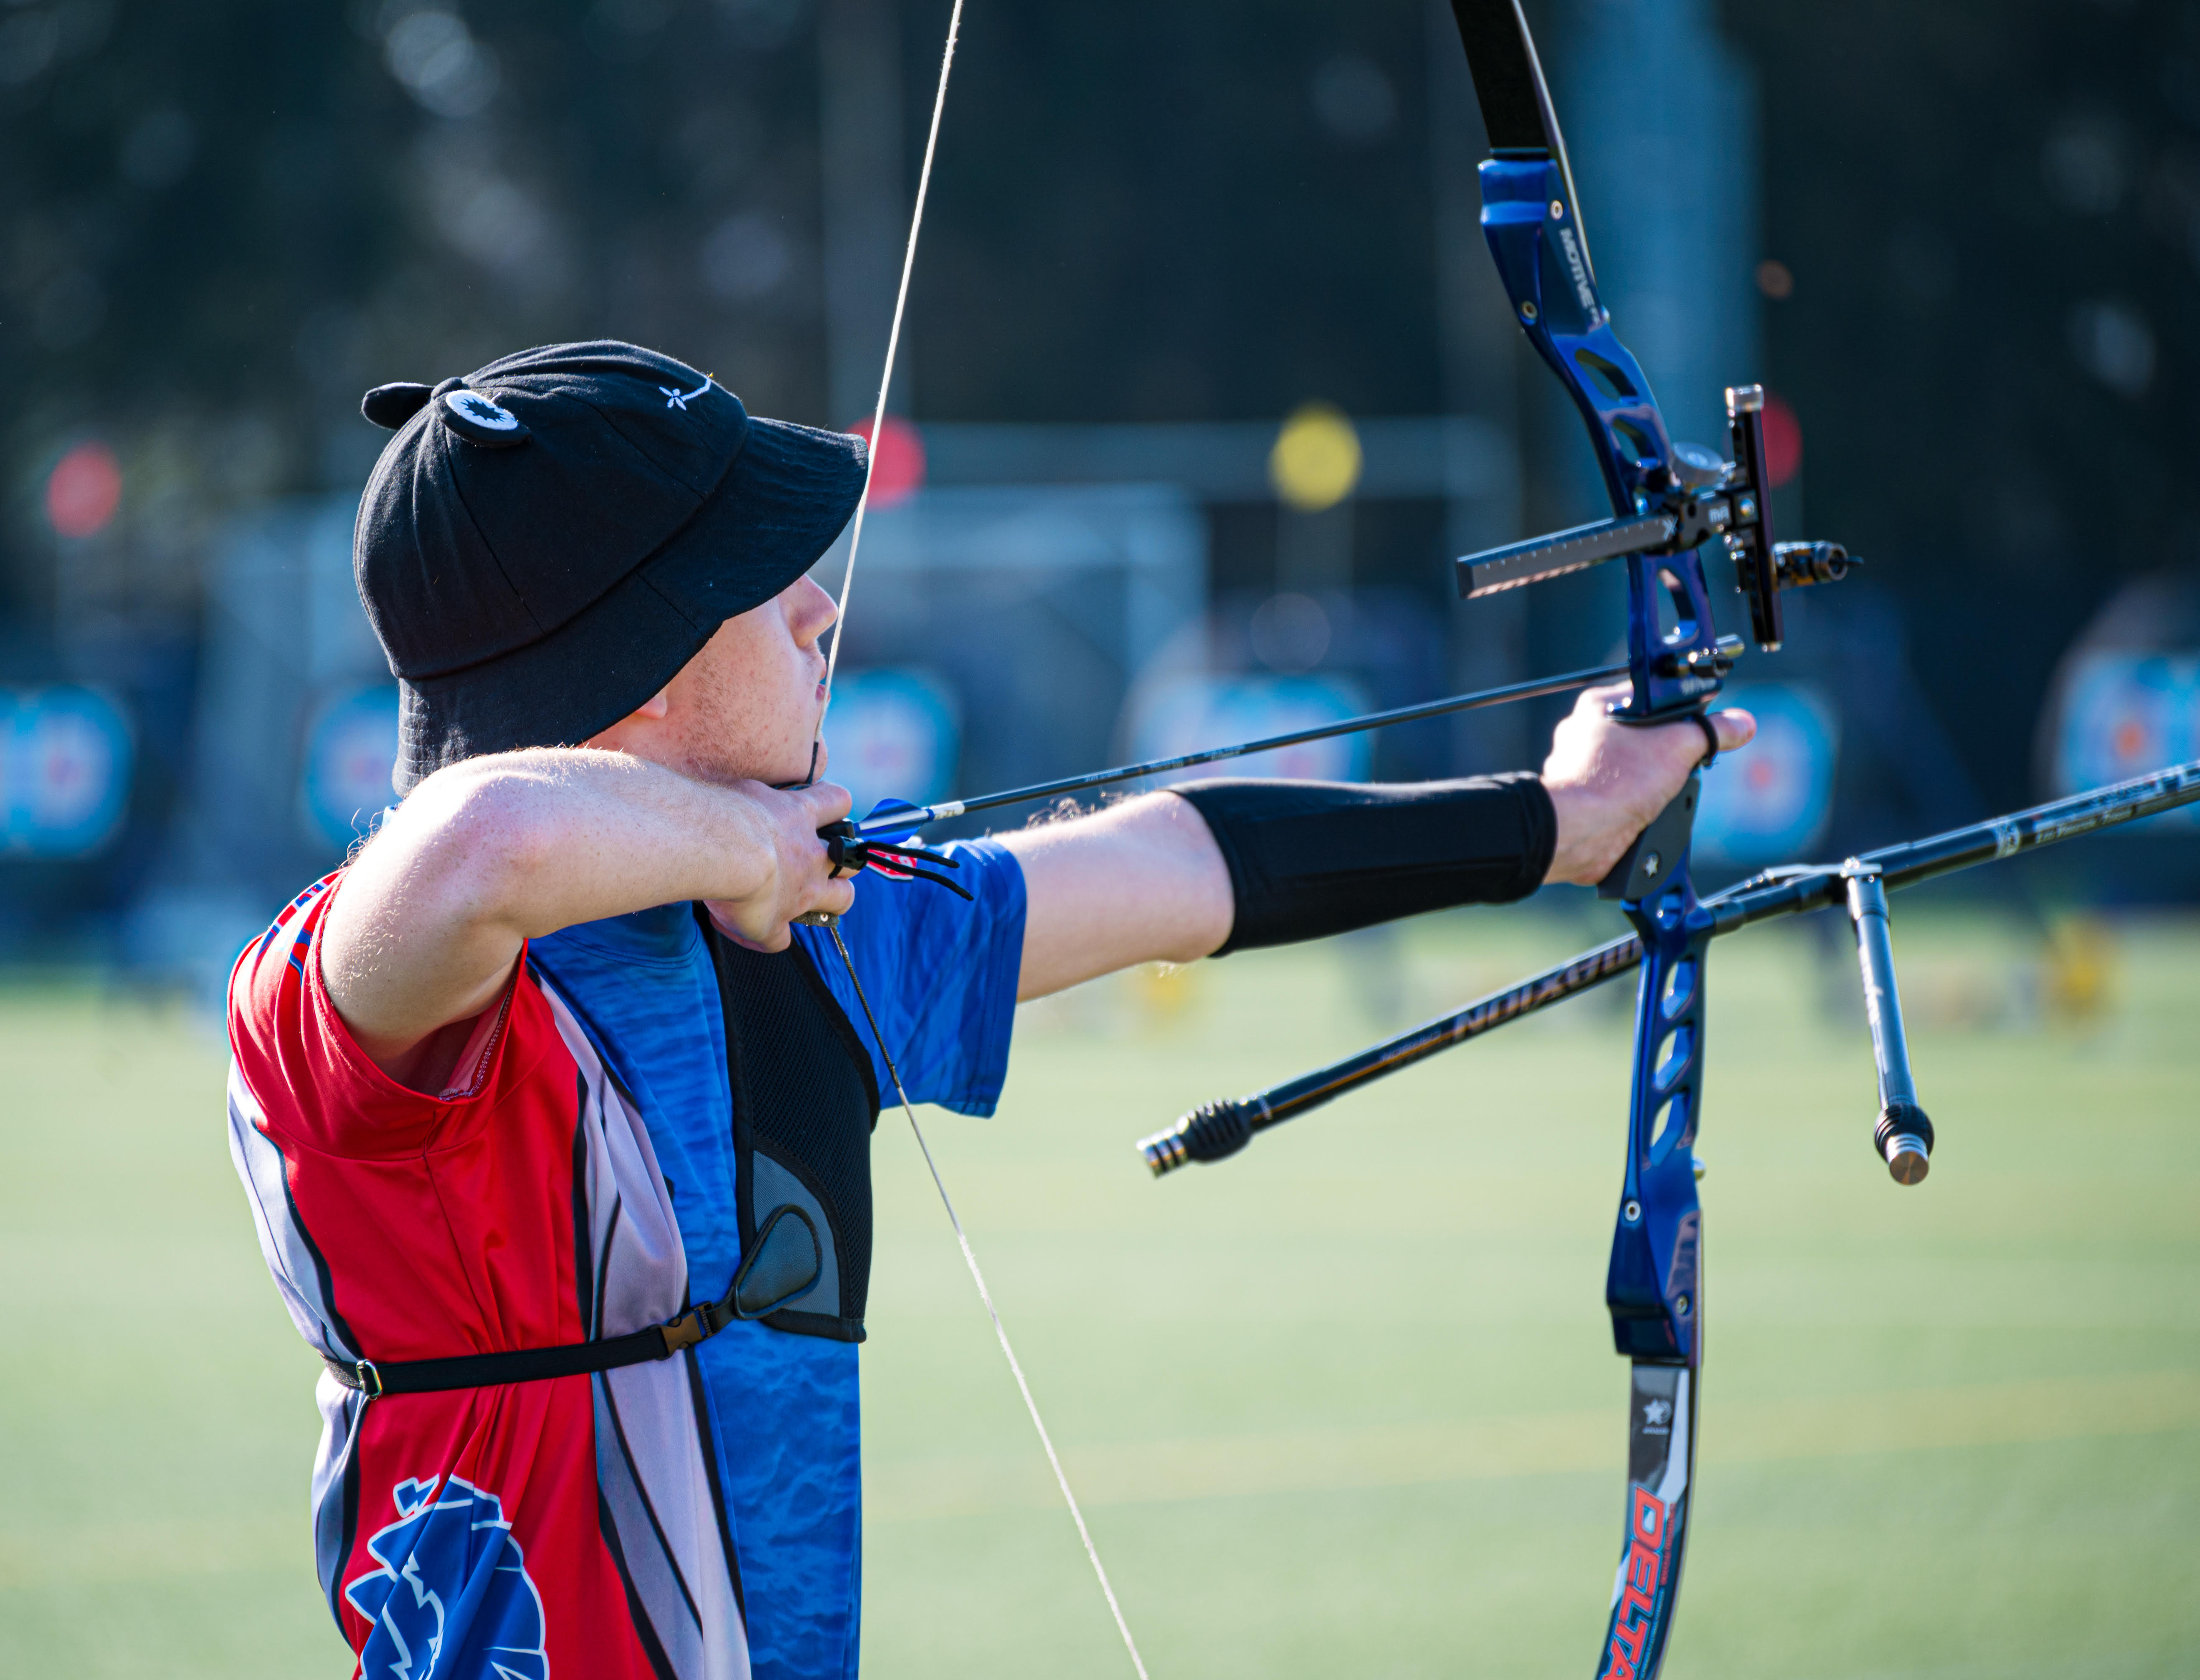 Atlantic Cape archer Jared Lancaster competes at the 2022 USA Archery Collegiate Target Regionals-East Region at James Madison University April 23 and 24 in Virginia.